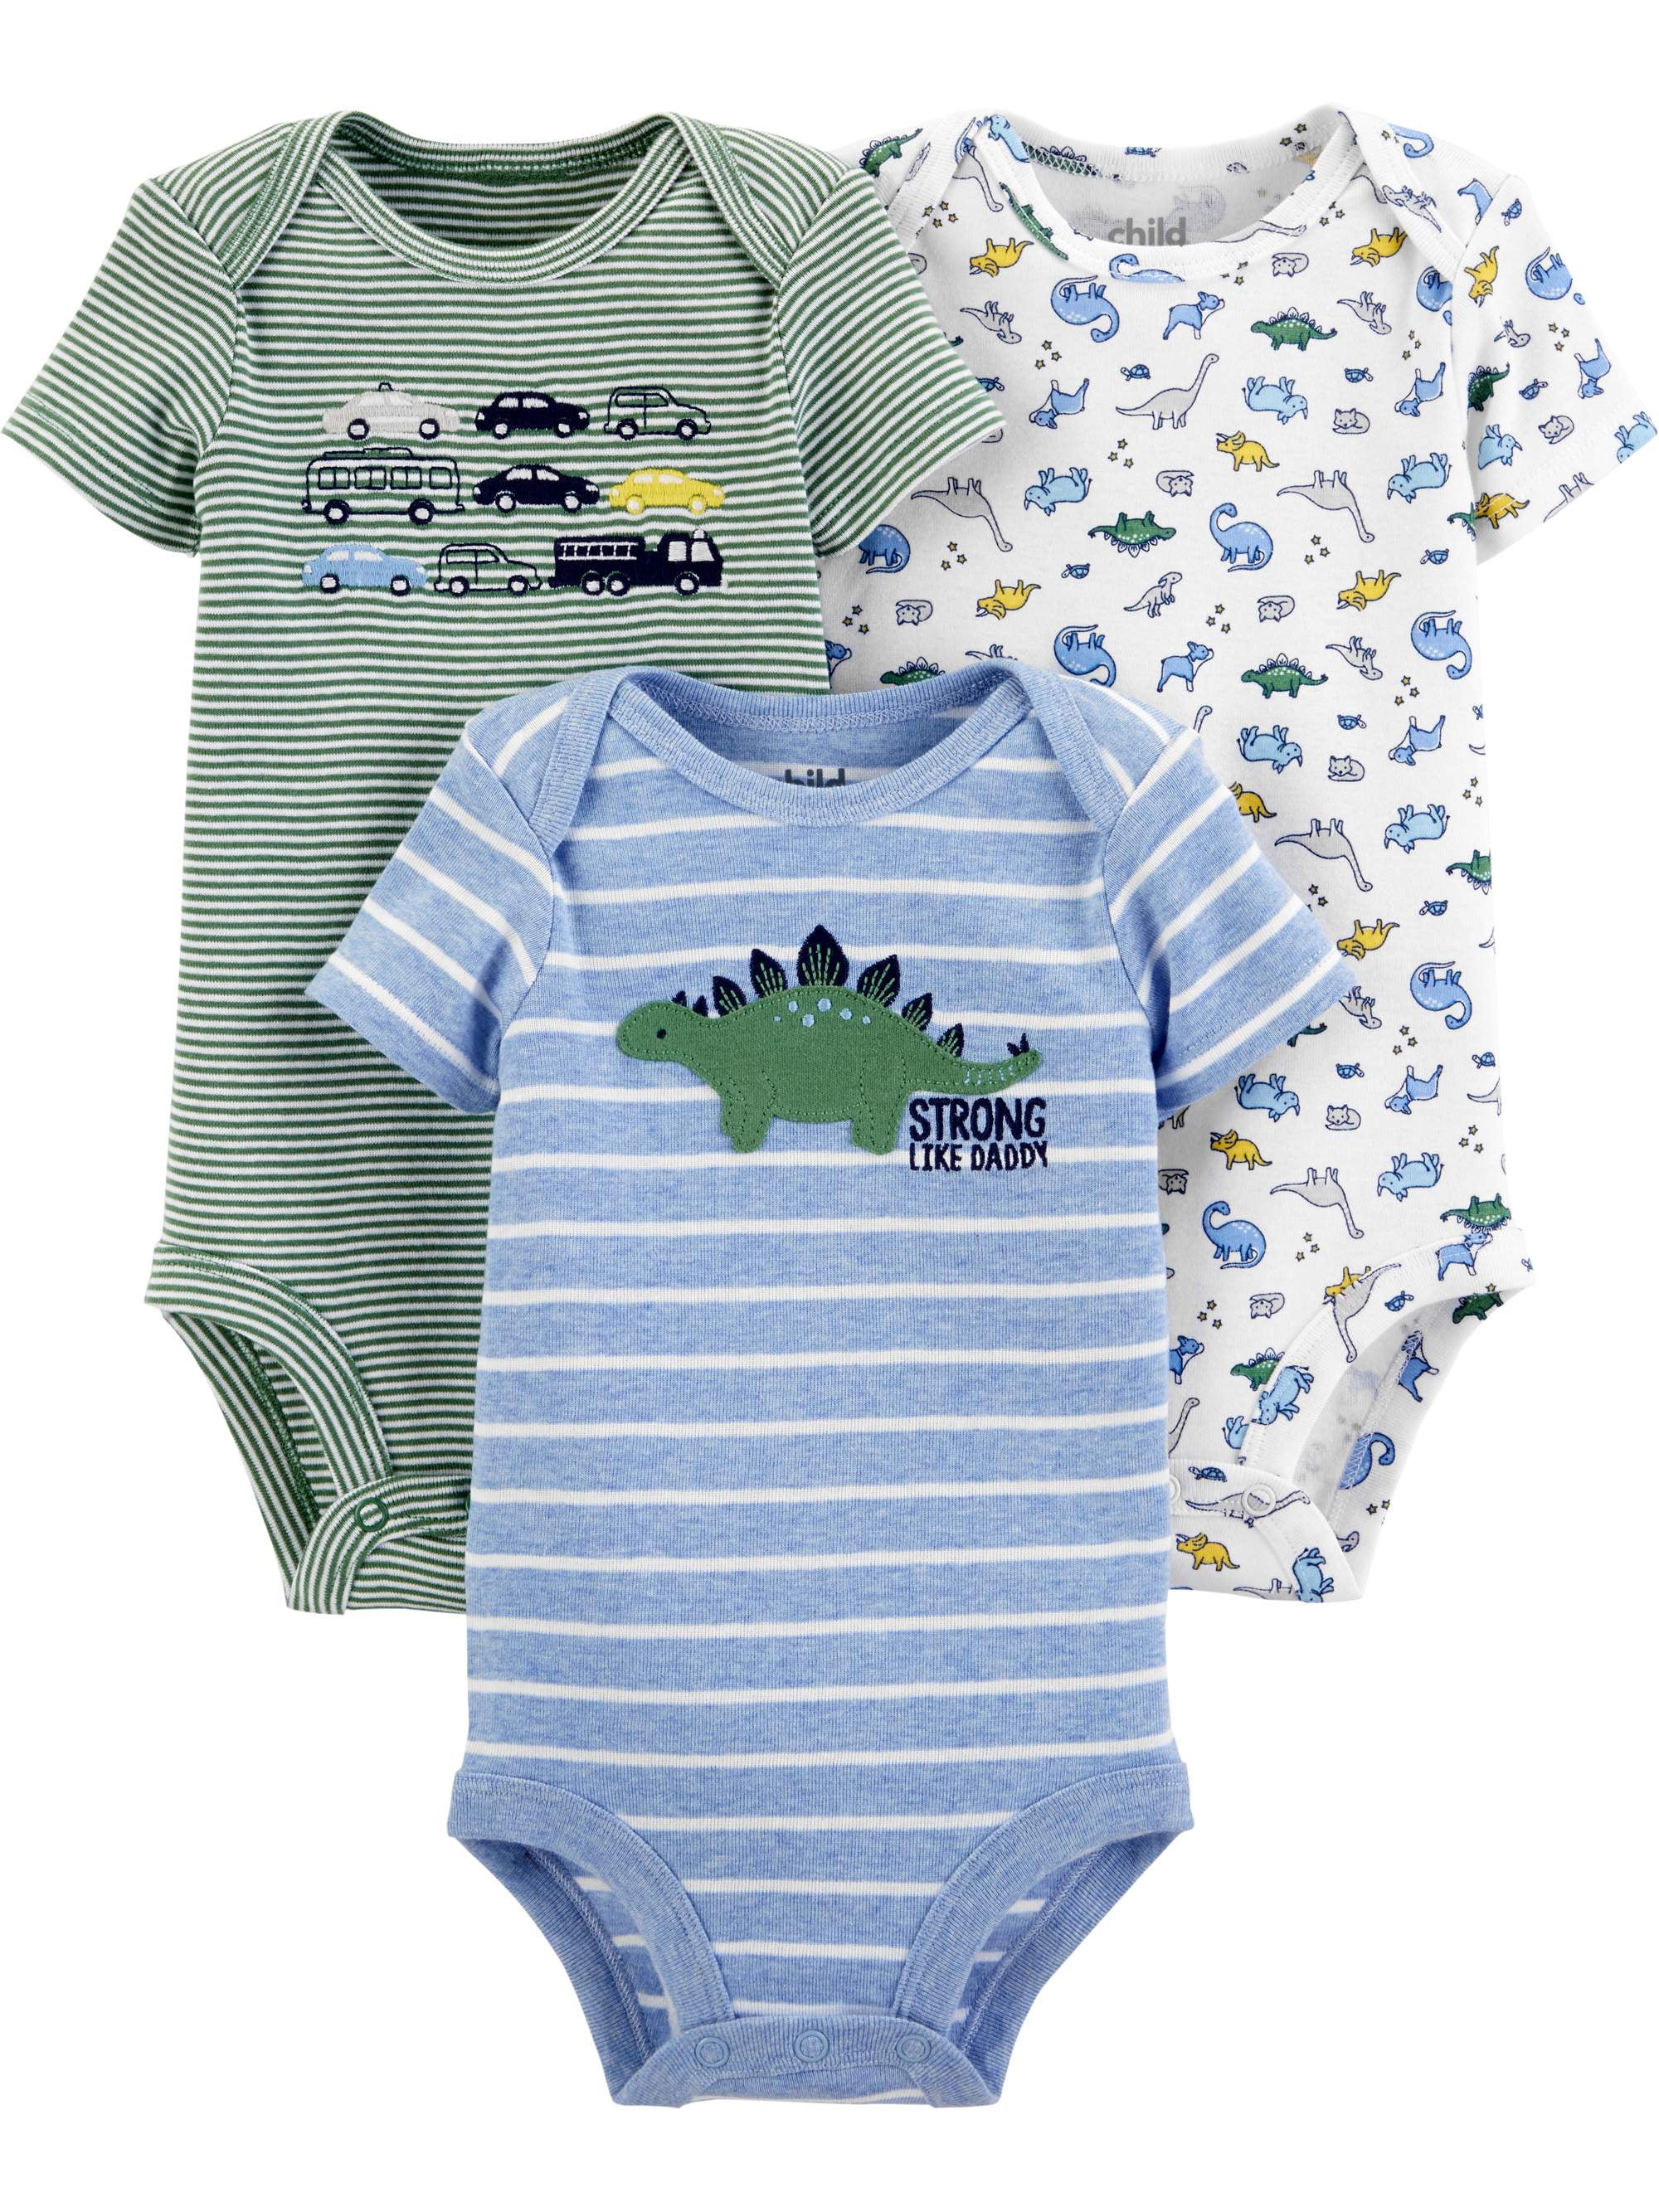 6-9M SIZES: PREEMIE BABY BOY'S 3-PC FOOTED OUTFIT SET *NWT- CARTER'S 